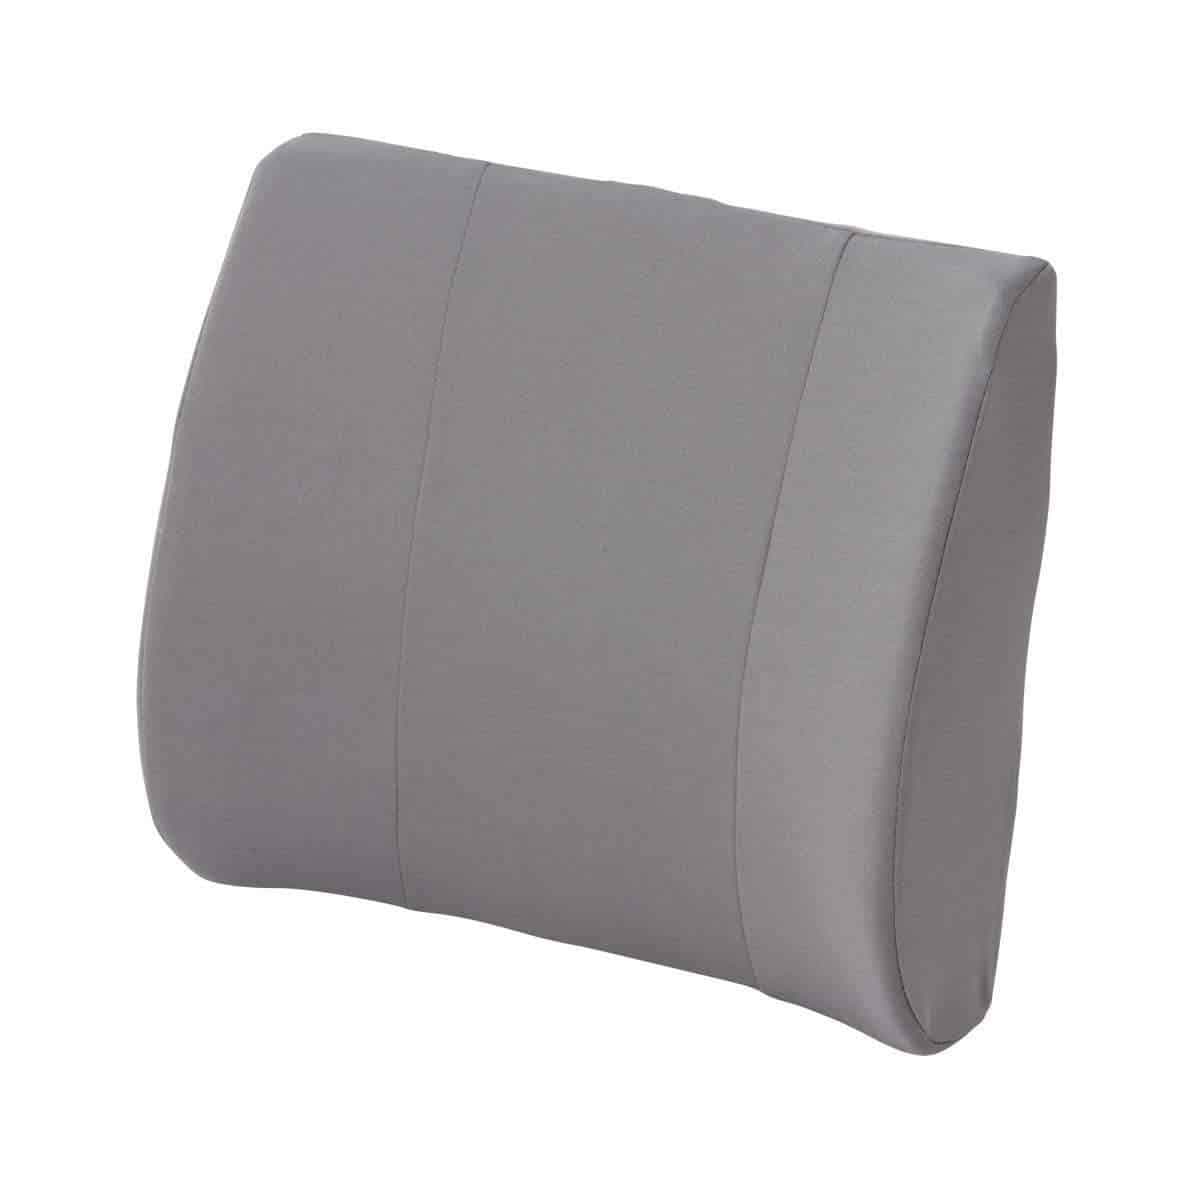 DMI Lumbar Support Pillow for Chair to Assist with Back Support with  Removable Washable Cover to Ease Lower Back Pain while Improving Posture,  14 x 13